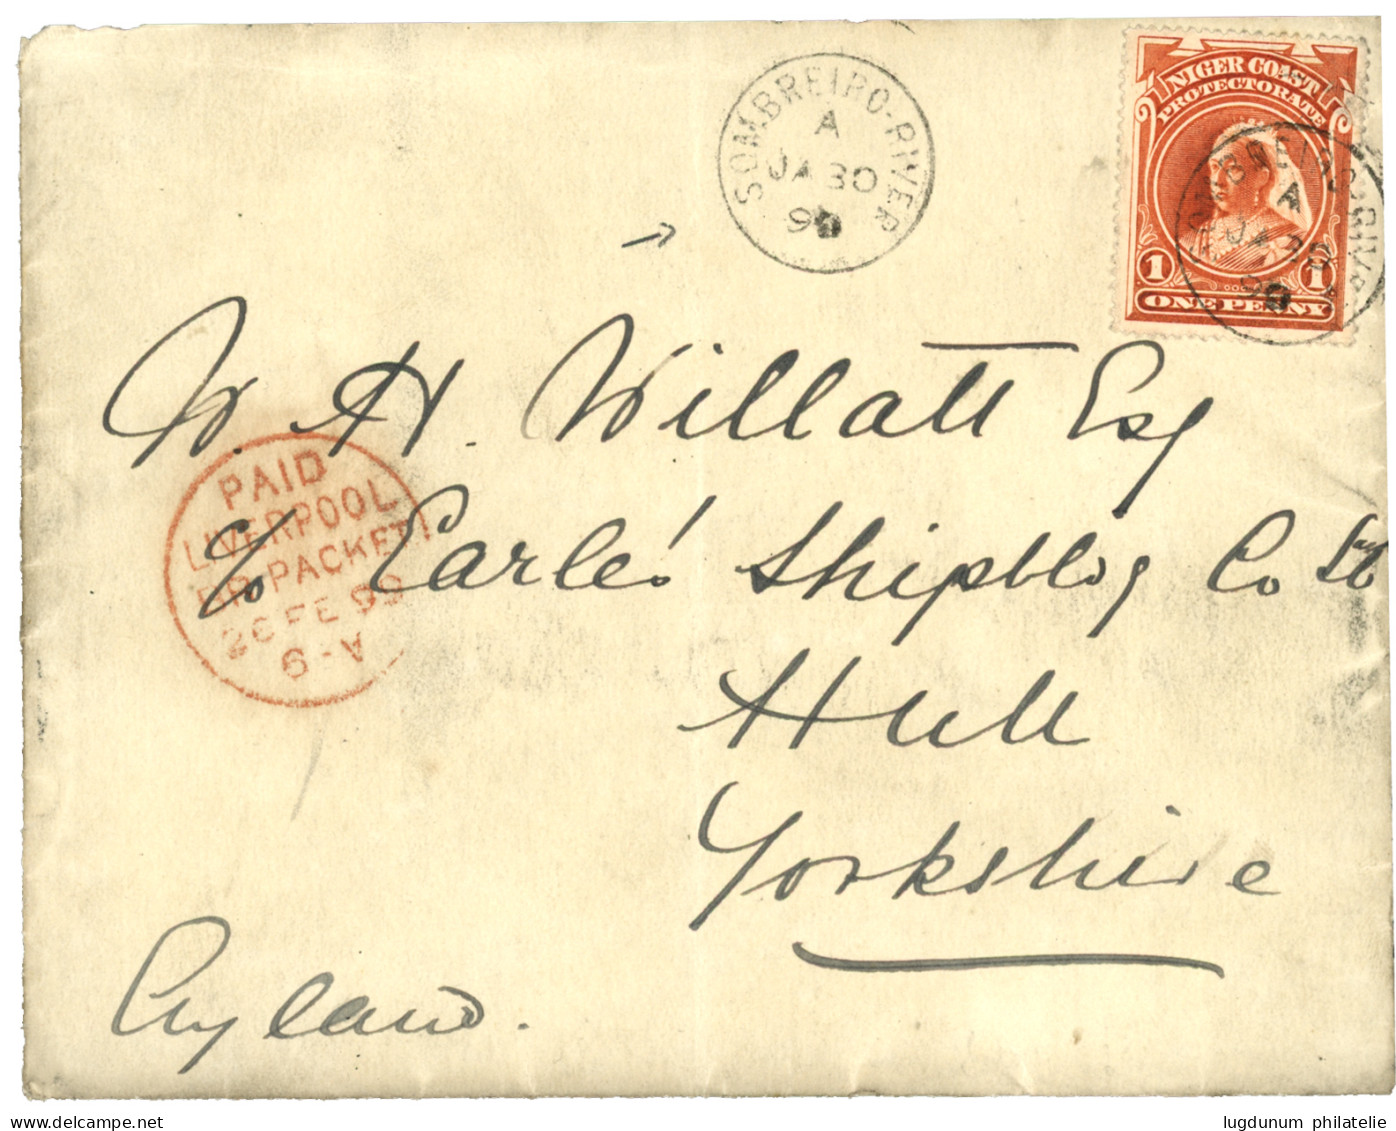 NIGER COAST : 1899 1d Canc. SOMBREIPO-RIVER On Cover (FRONT ONLY) To ENGLAND. Scarce. Vvf. - Nigeria (...-1960)